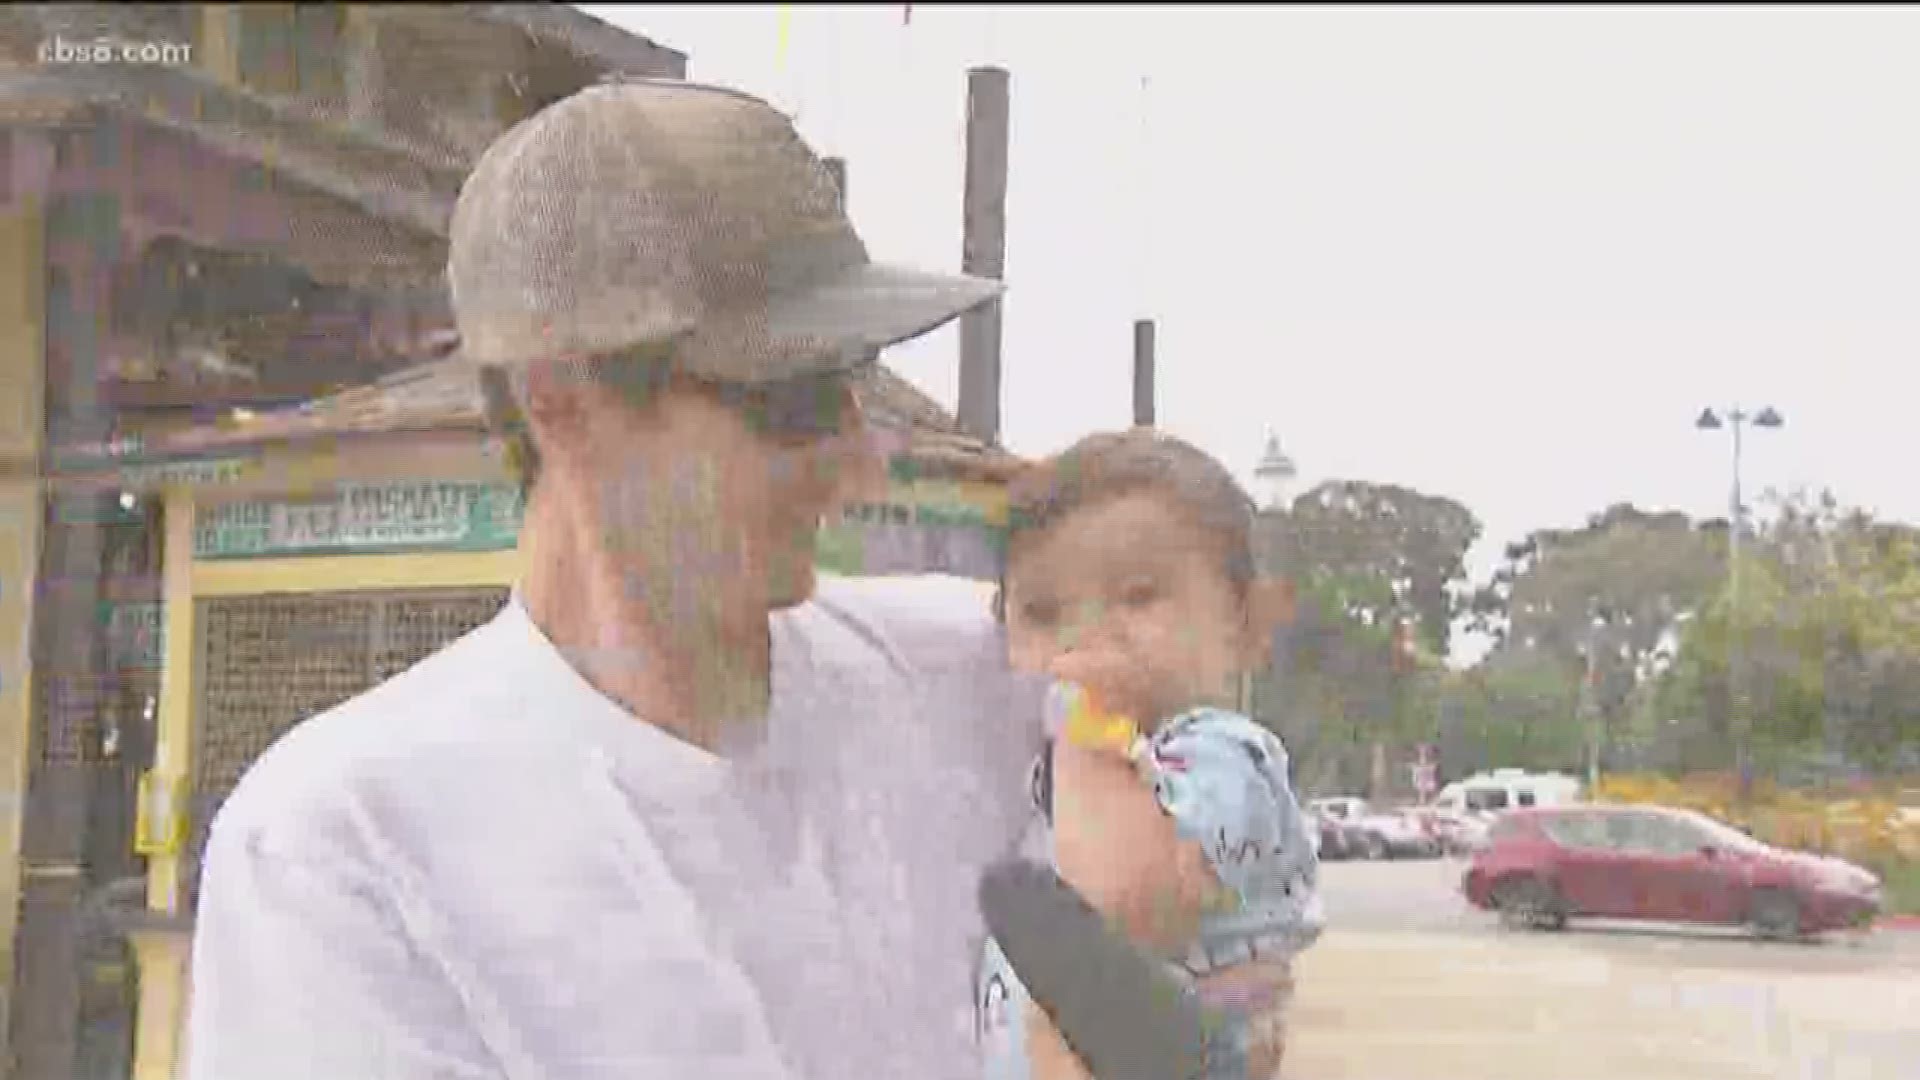 News 8’s Brandon Lewis visited Balboa Park to see how dads and families were celebrating there.